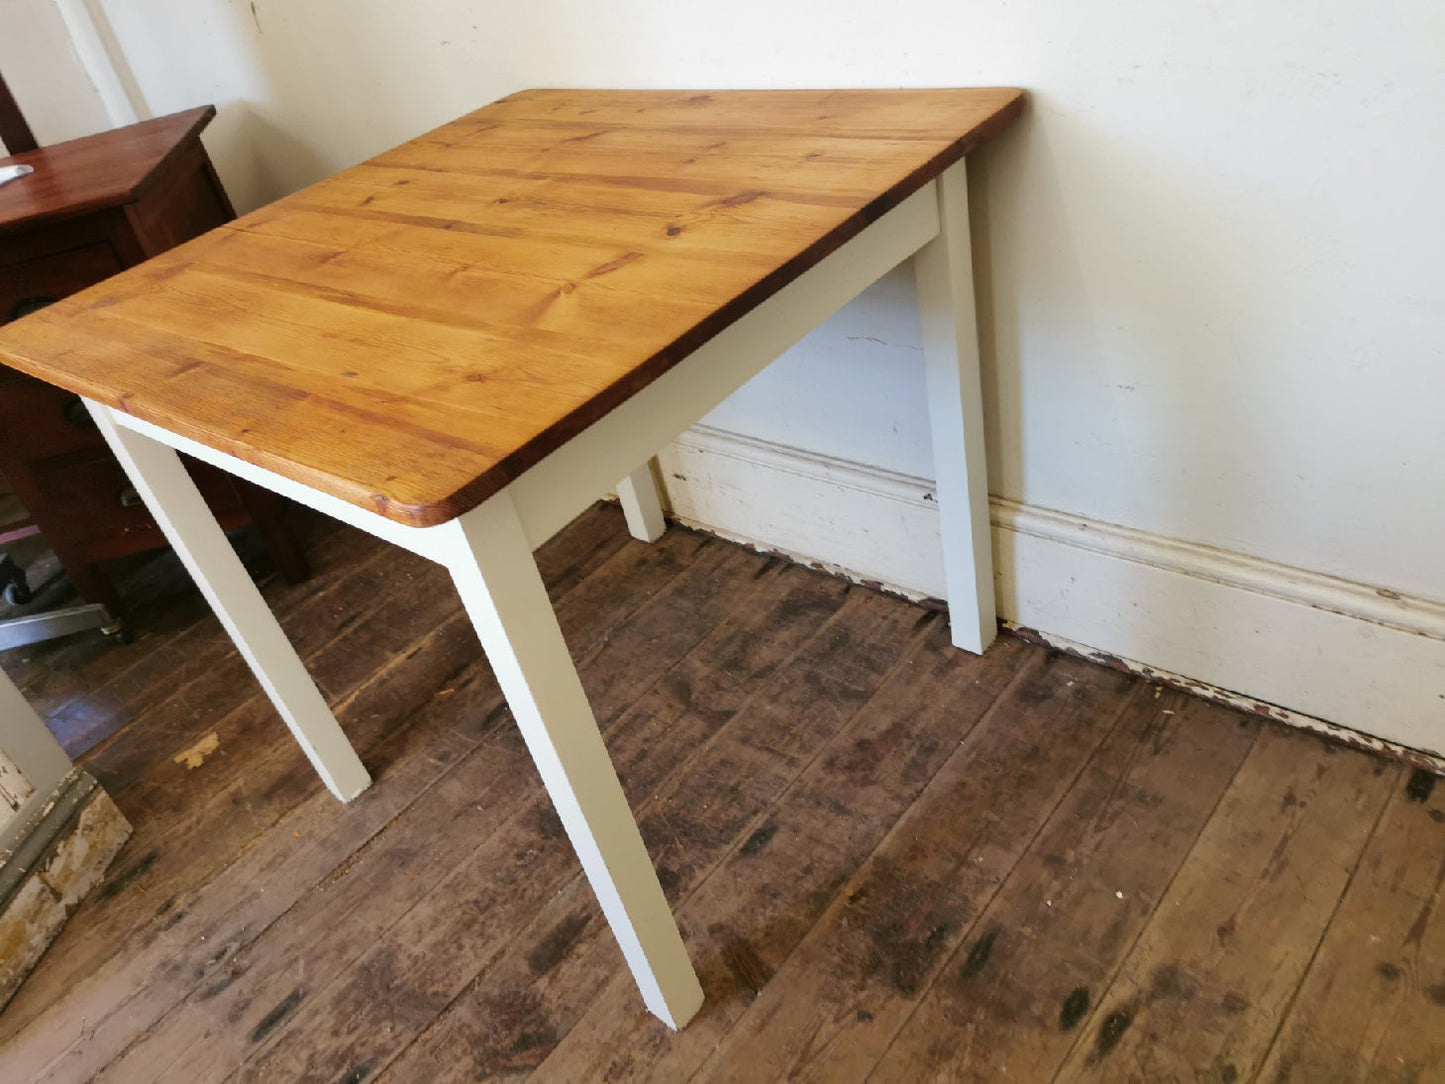 Square table with painted legs